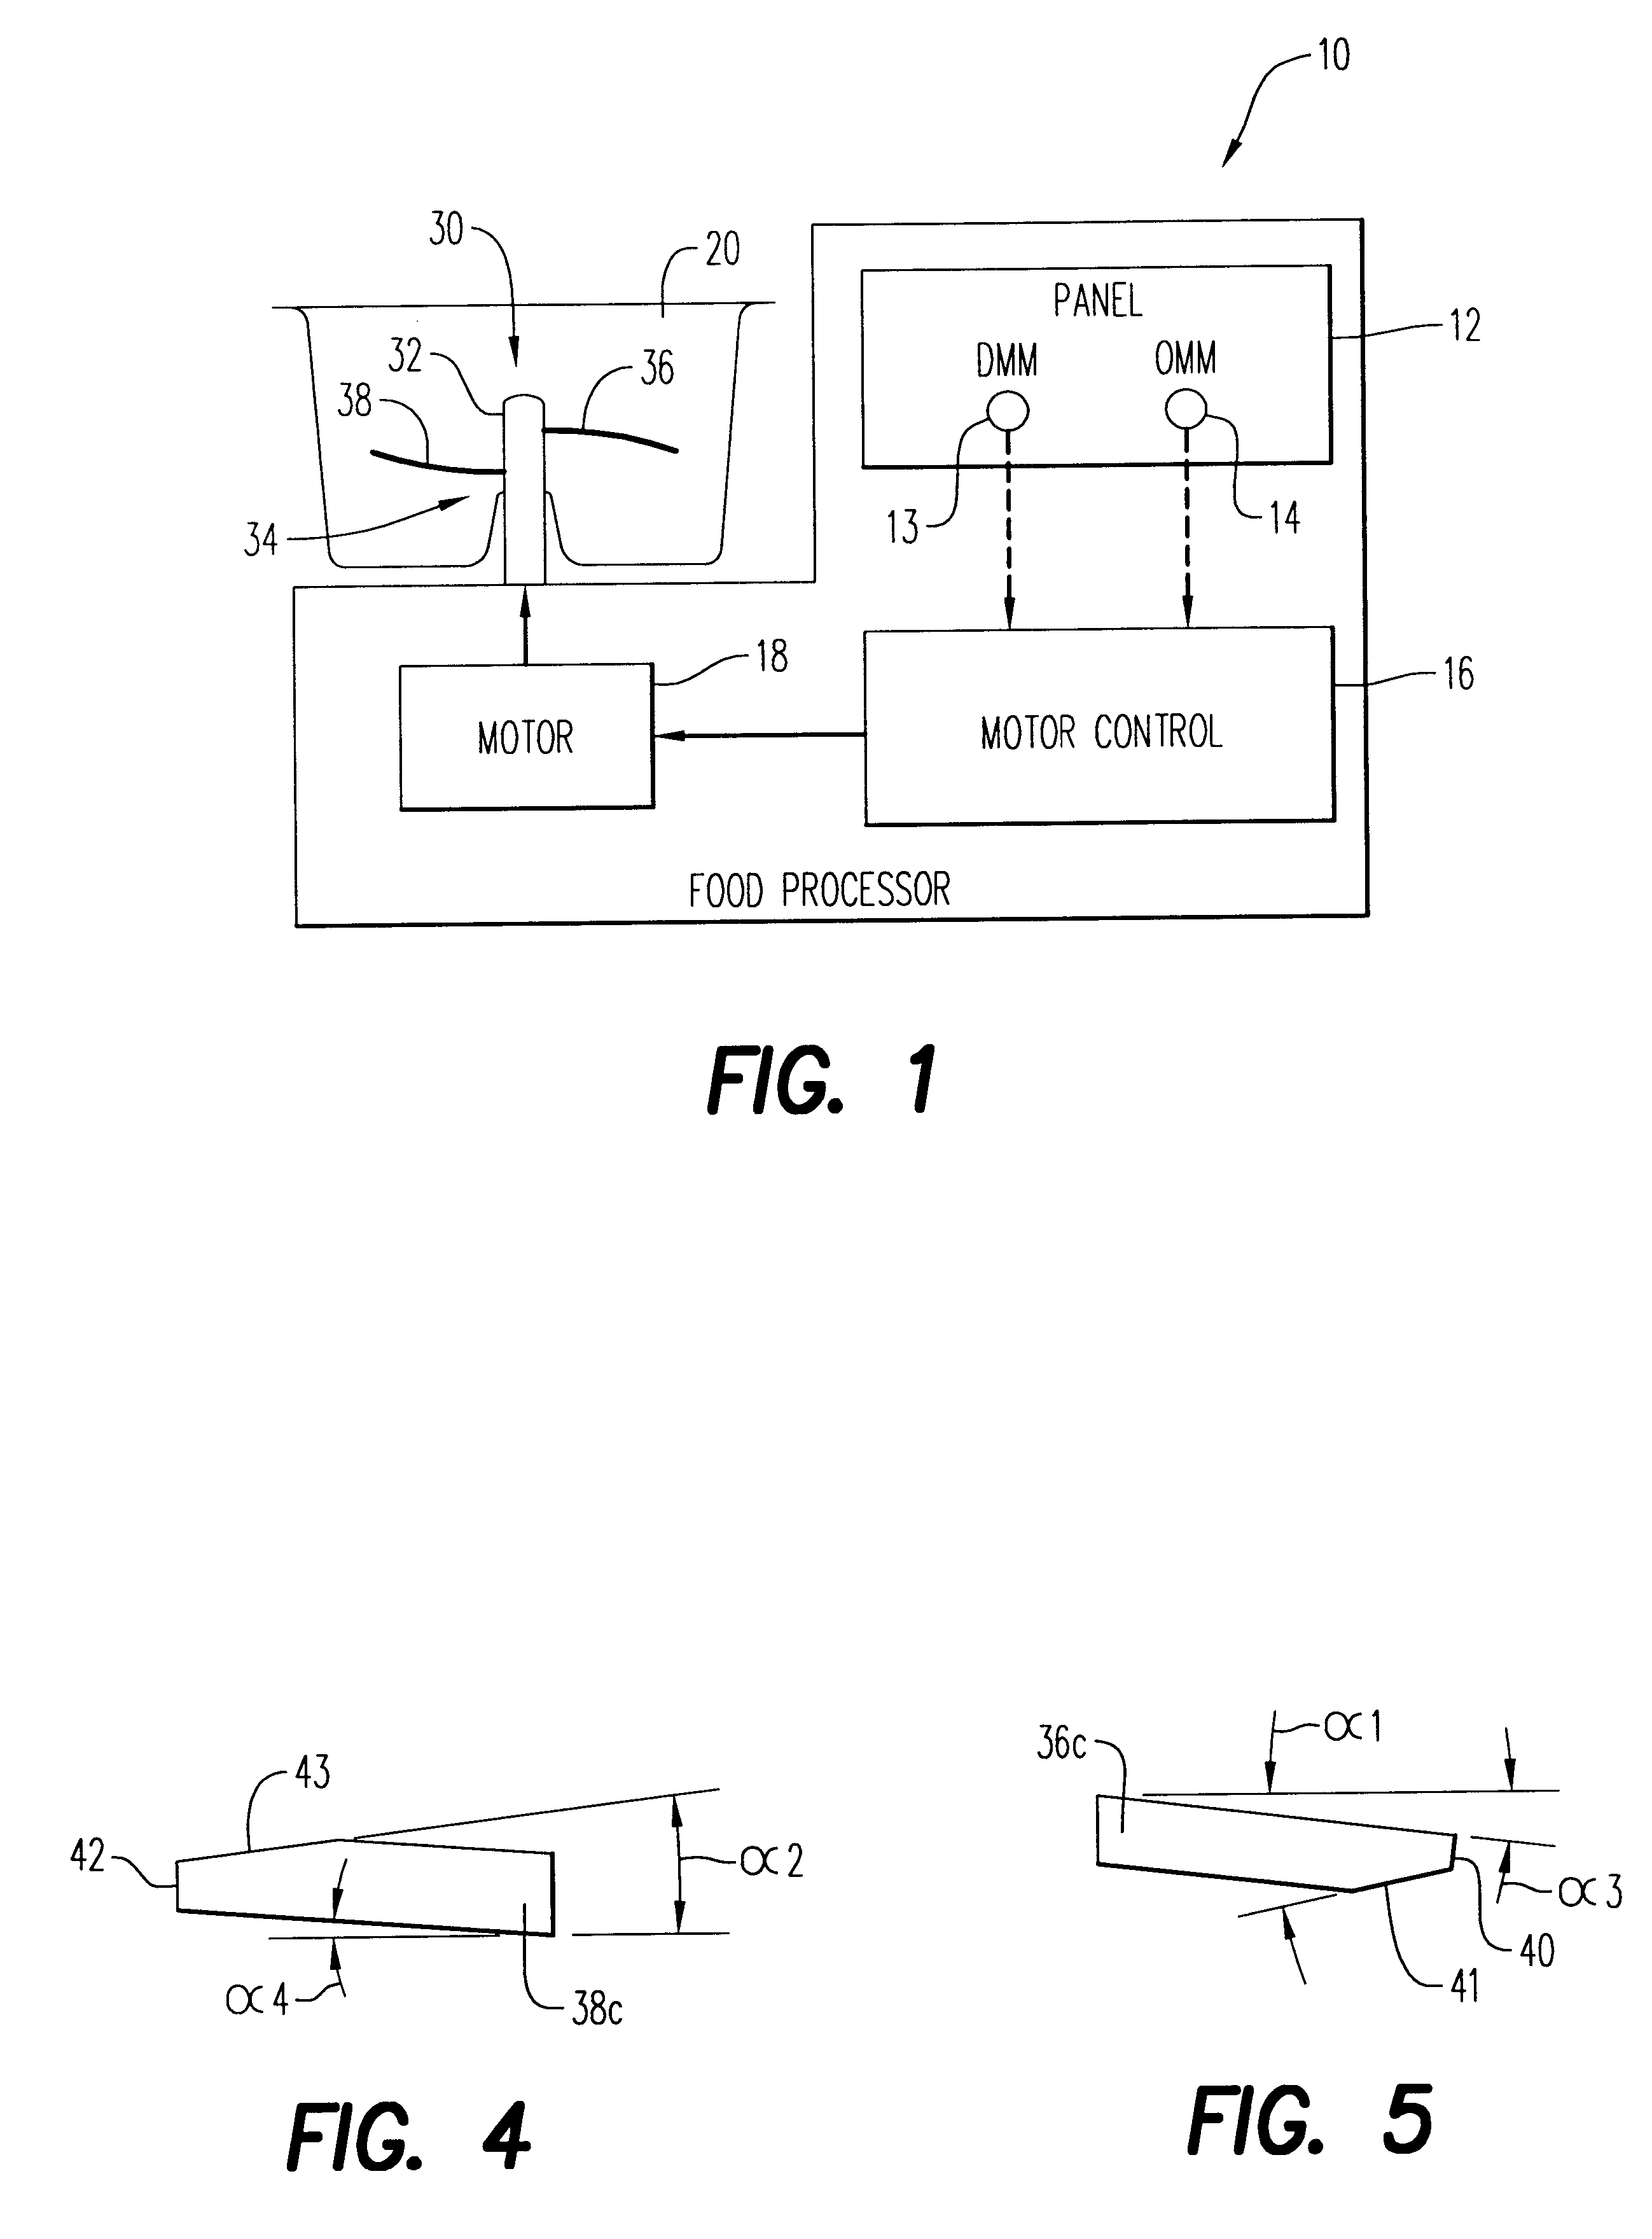 Food processing appliance